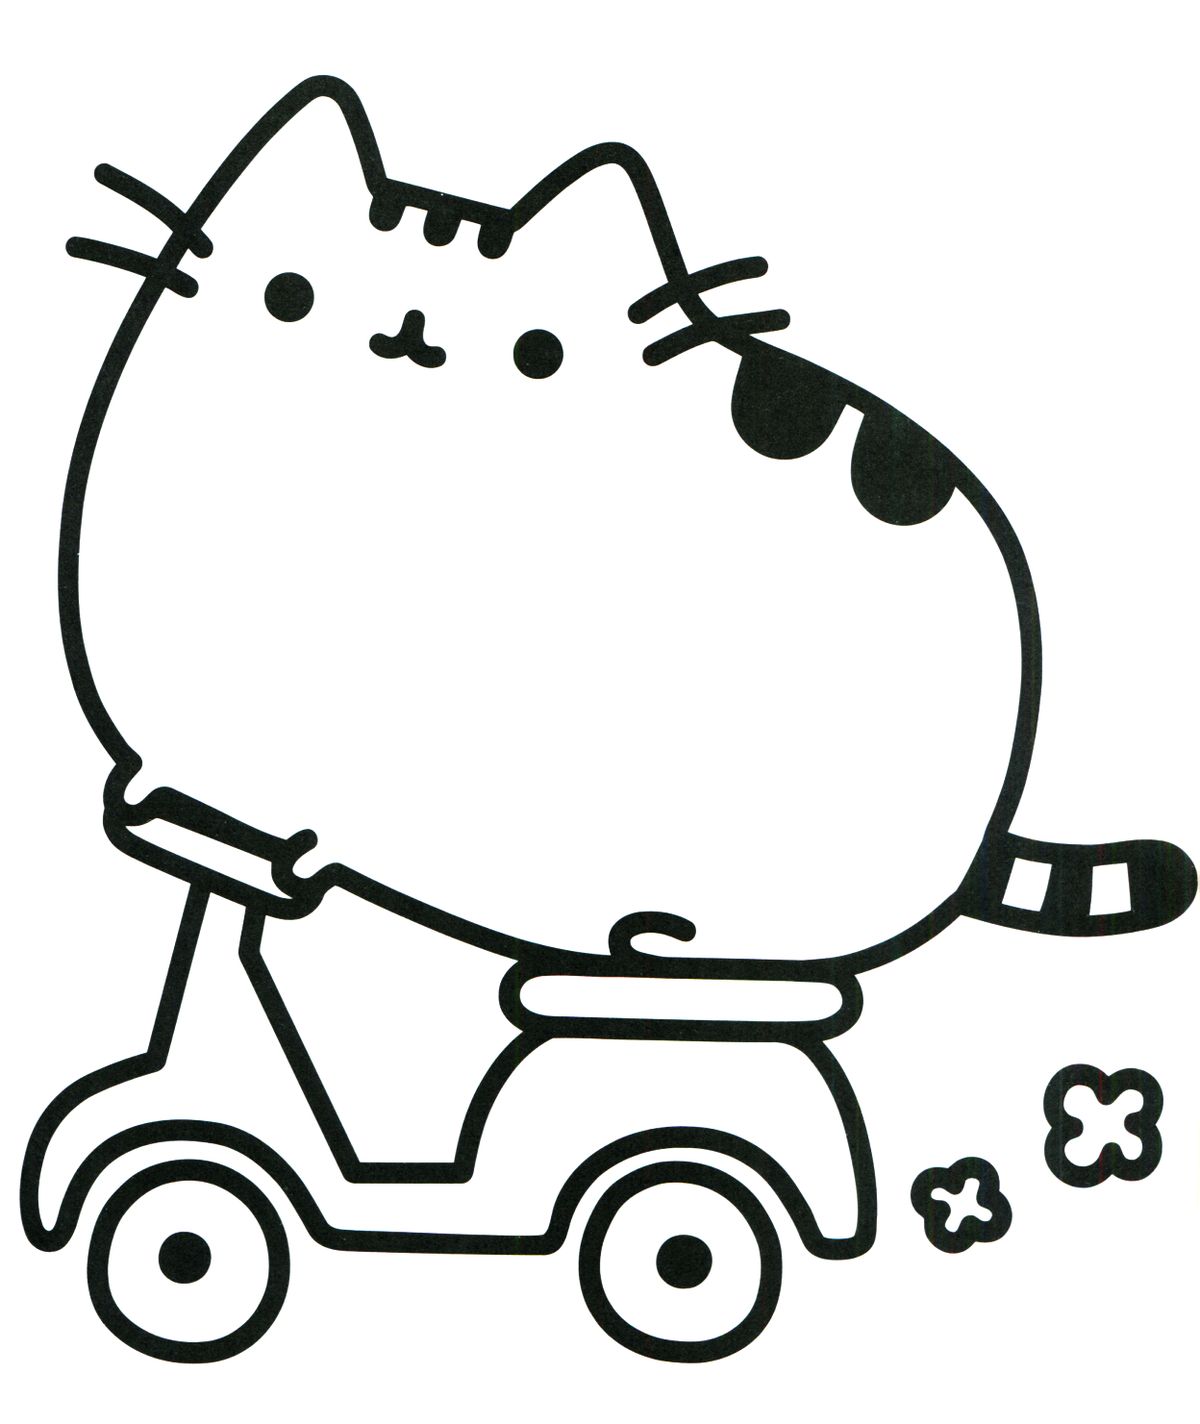 Coloring Pages Cute Cats at GetDrawings.com | Free for ...